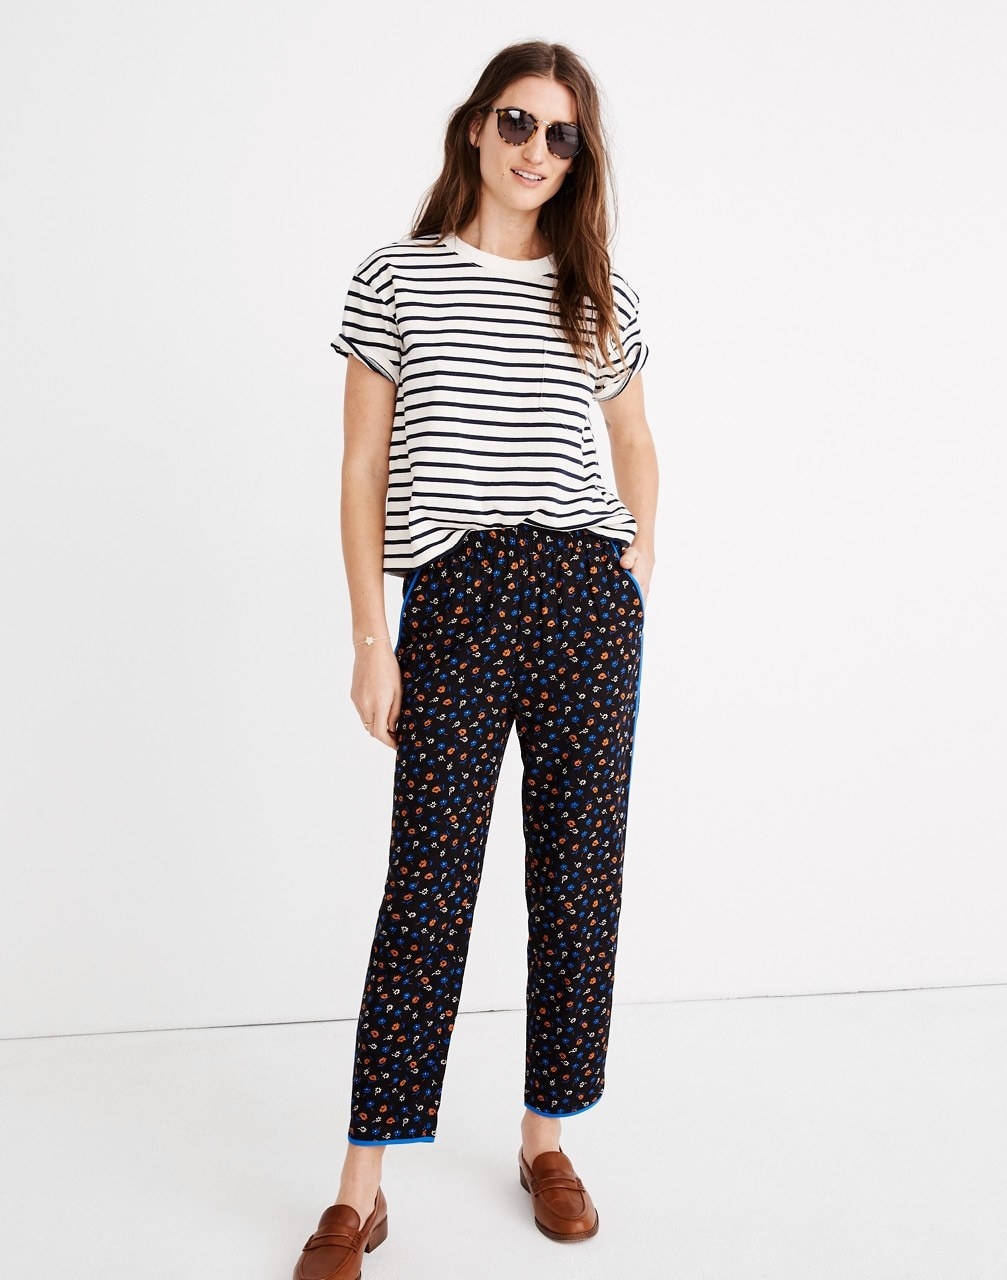 Tired of regular trousers? 😕 There's no time like NOW to try on